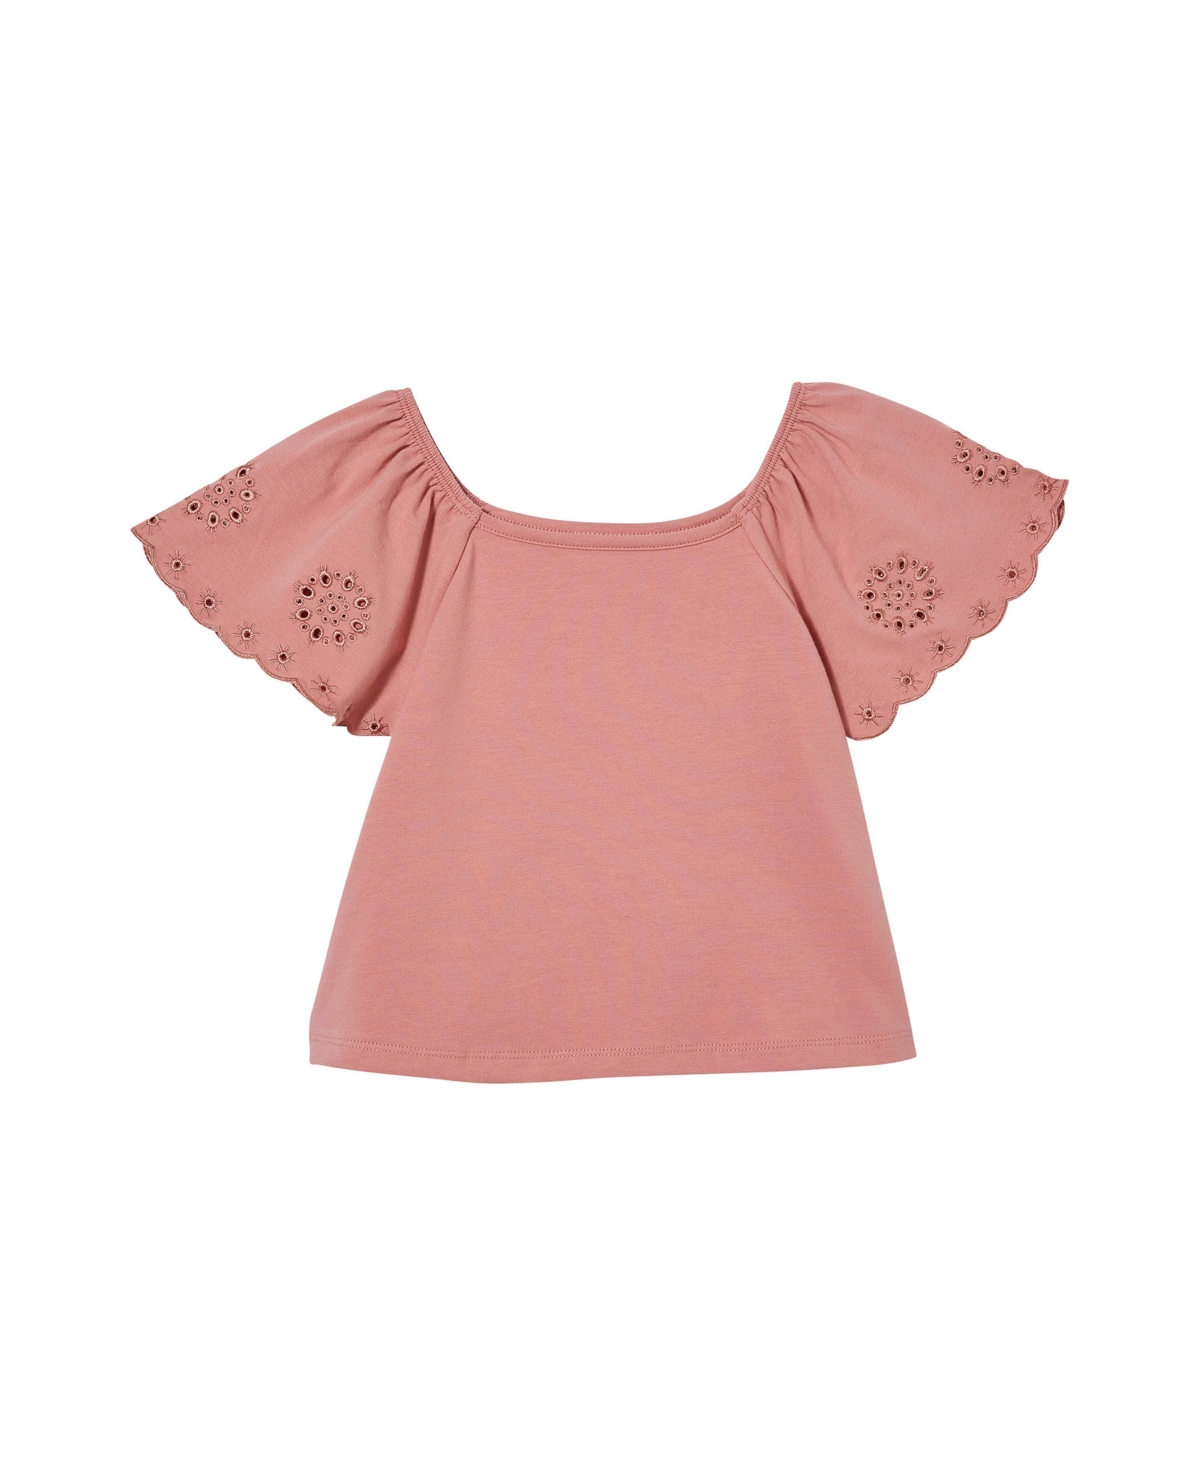 Cotton On Babies' Toddler Girls Ava Short Sleeve Top In Clay Pigeon